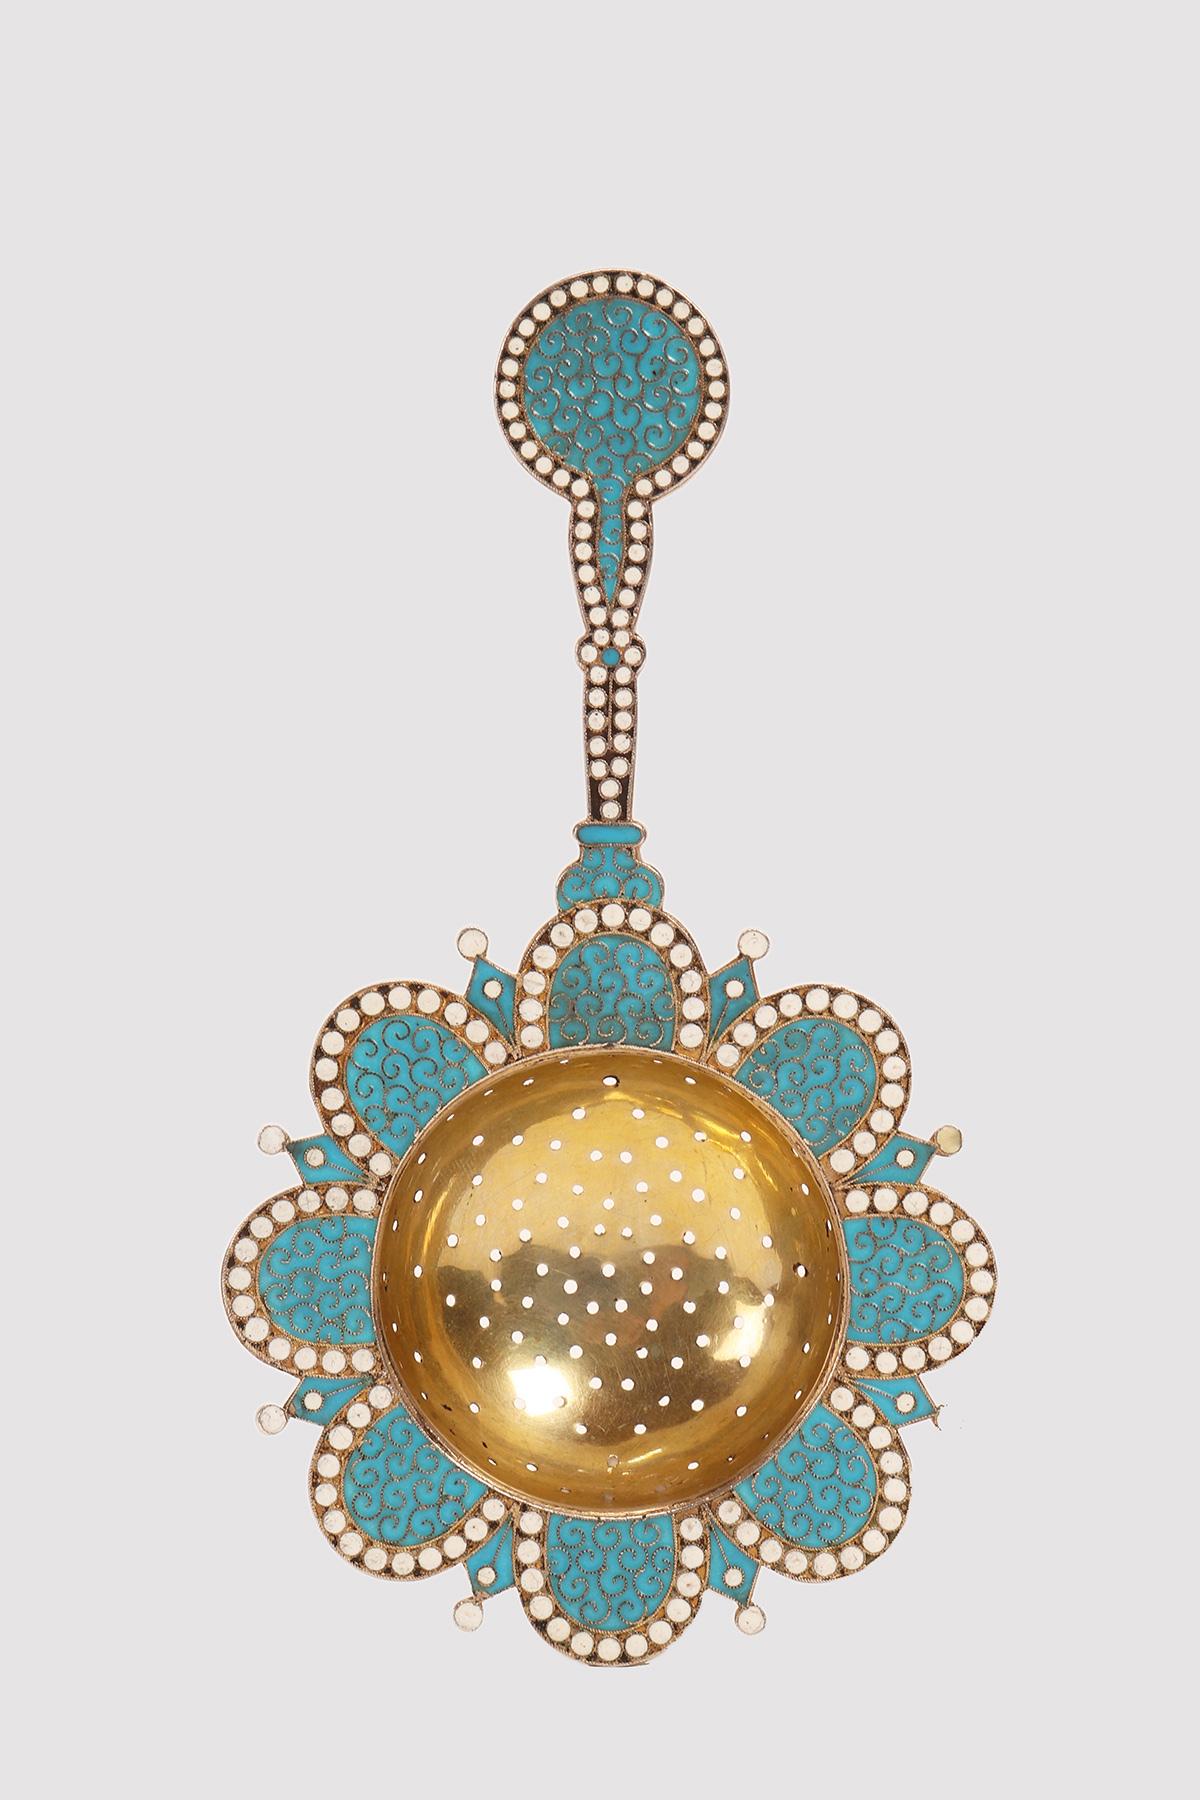 Tea strainer with handle, in 84 zolotnik silver, gilded and decorated with blue and white cloisonné enamels. Moscow, Russia, 1896.